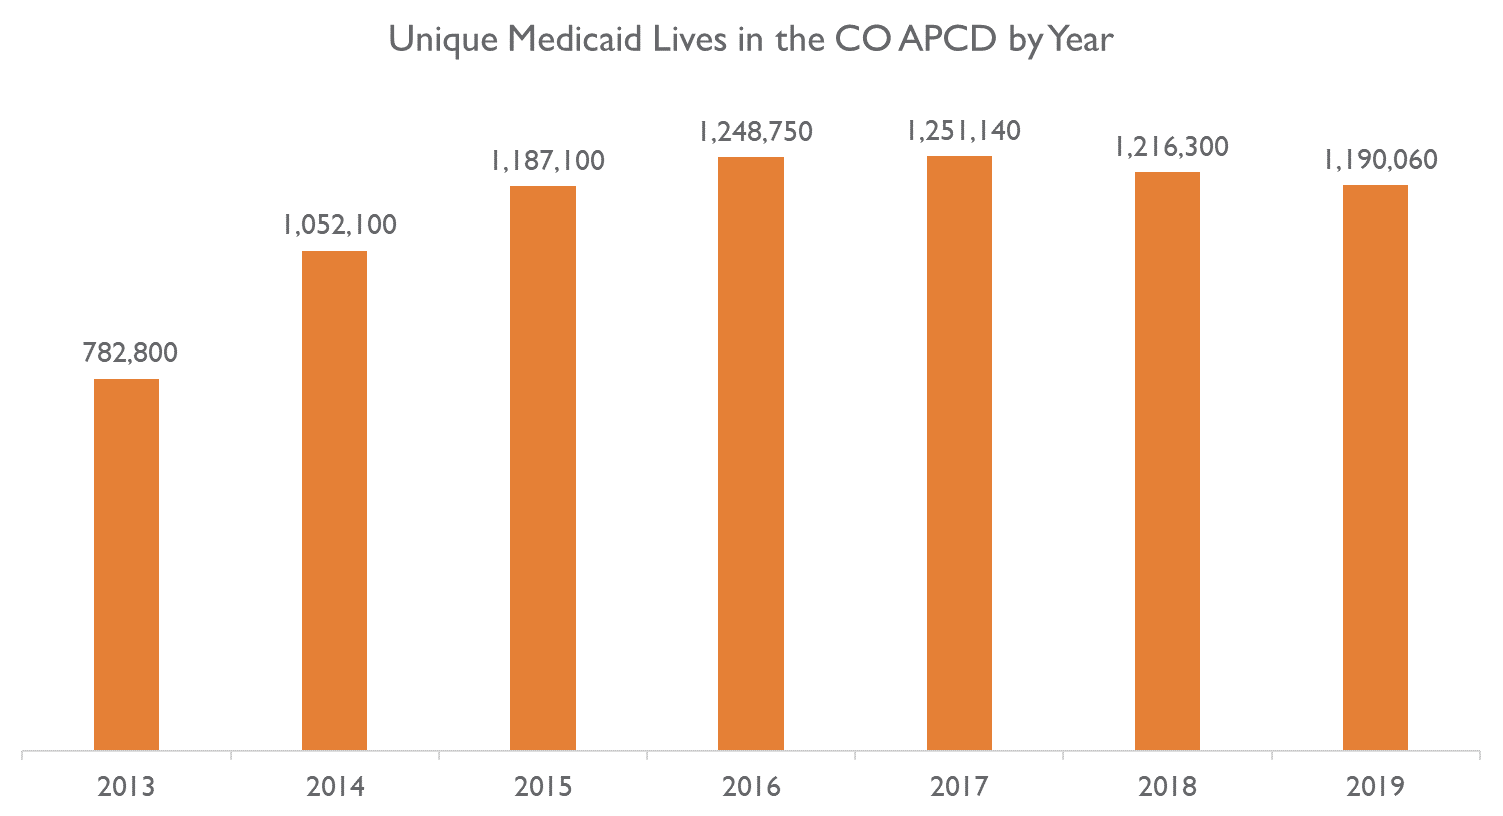 Chart indicating how many unique Medicaid lives were in the CO APCD each year between 2013 and 2019. 782,800 in 2013 and 1,190,060 in 2019. The year with the highest number is 2017 at 1,251,140 unique lives.